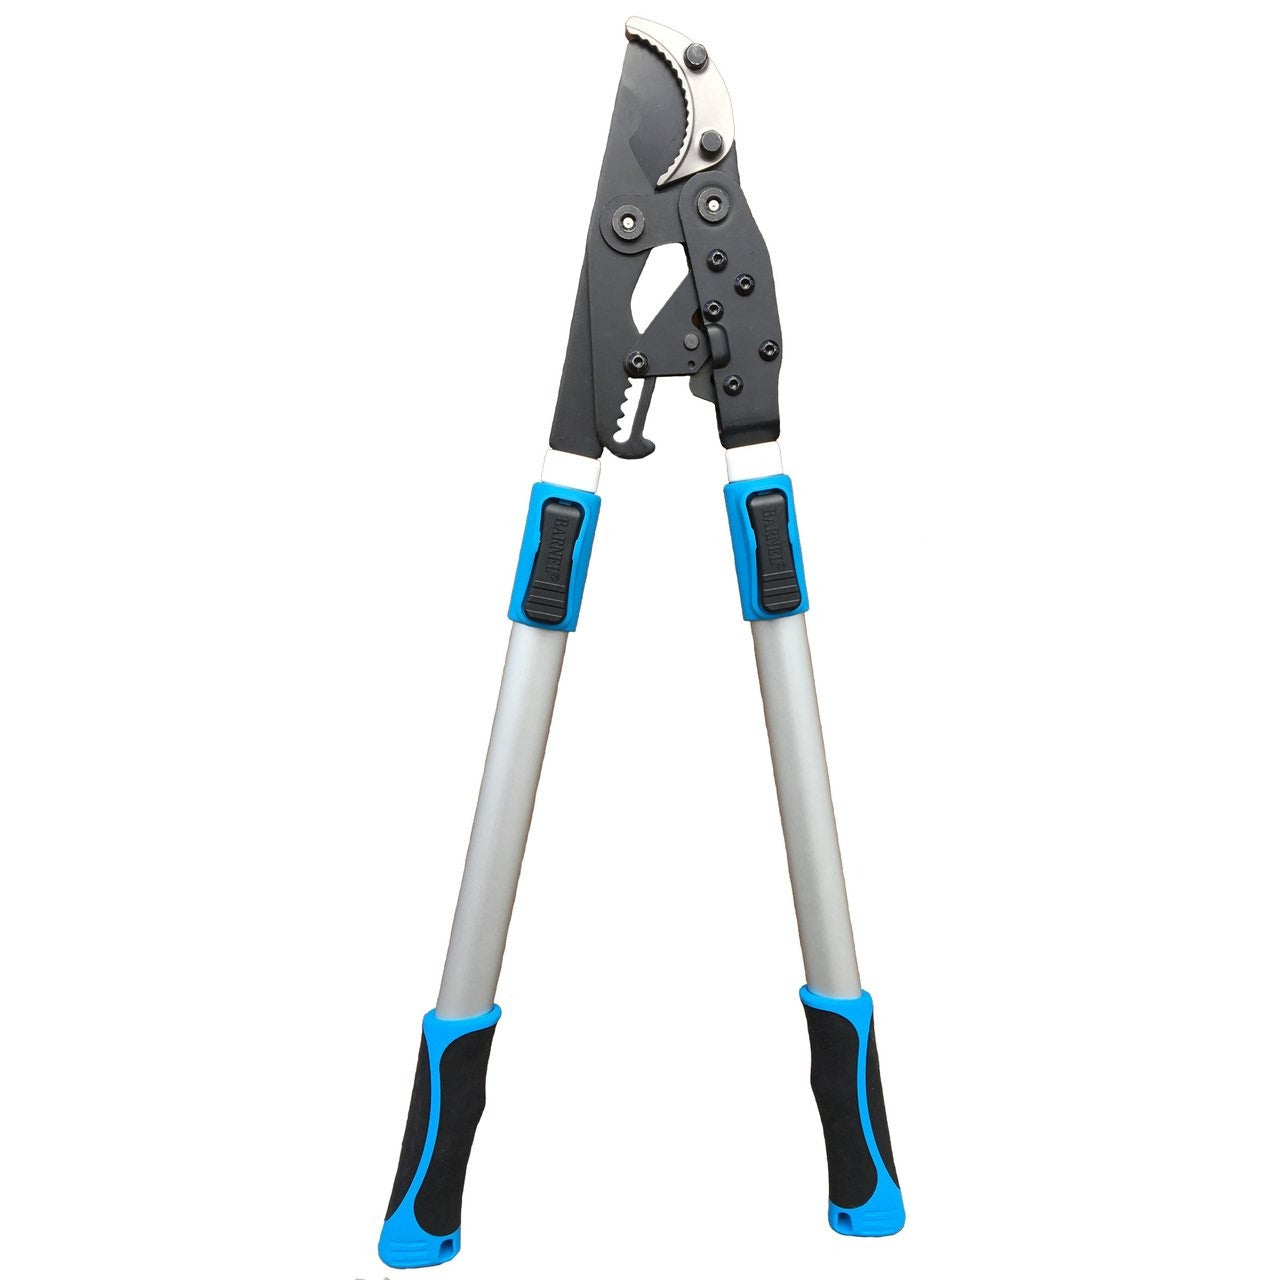 Telescopic Ratchet Loppers – Heavy Duty, Professional Quality from Barnel